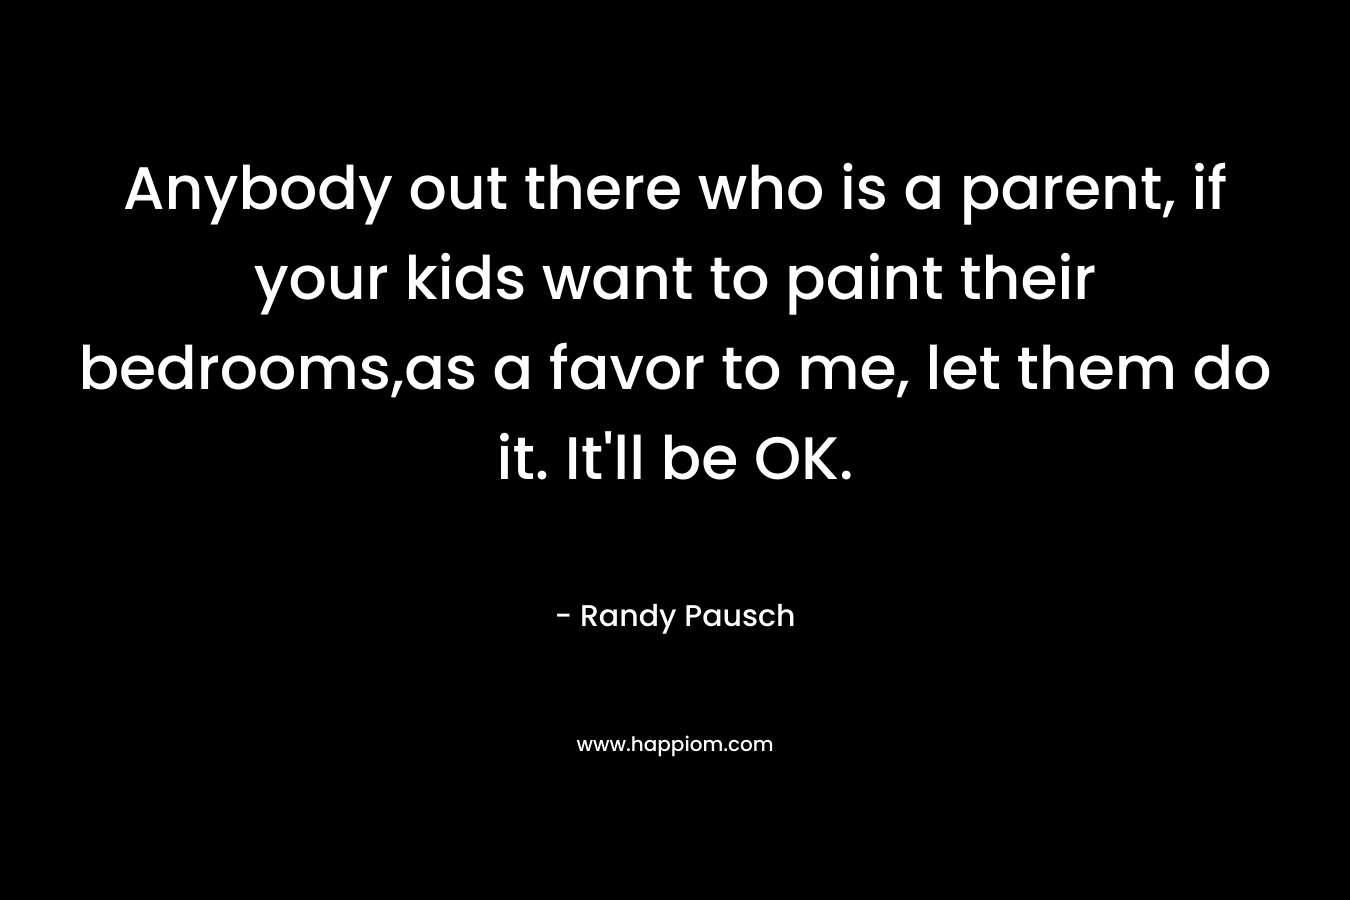 Anybody out there who is a parent, if your kids want to paint their bedrooms,as a favor to me, let them do it. It’ll be OK. – Randy Pausch